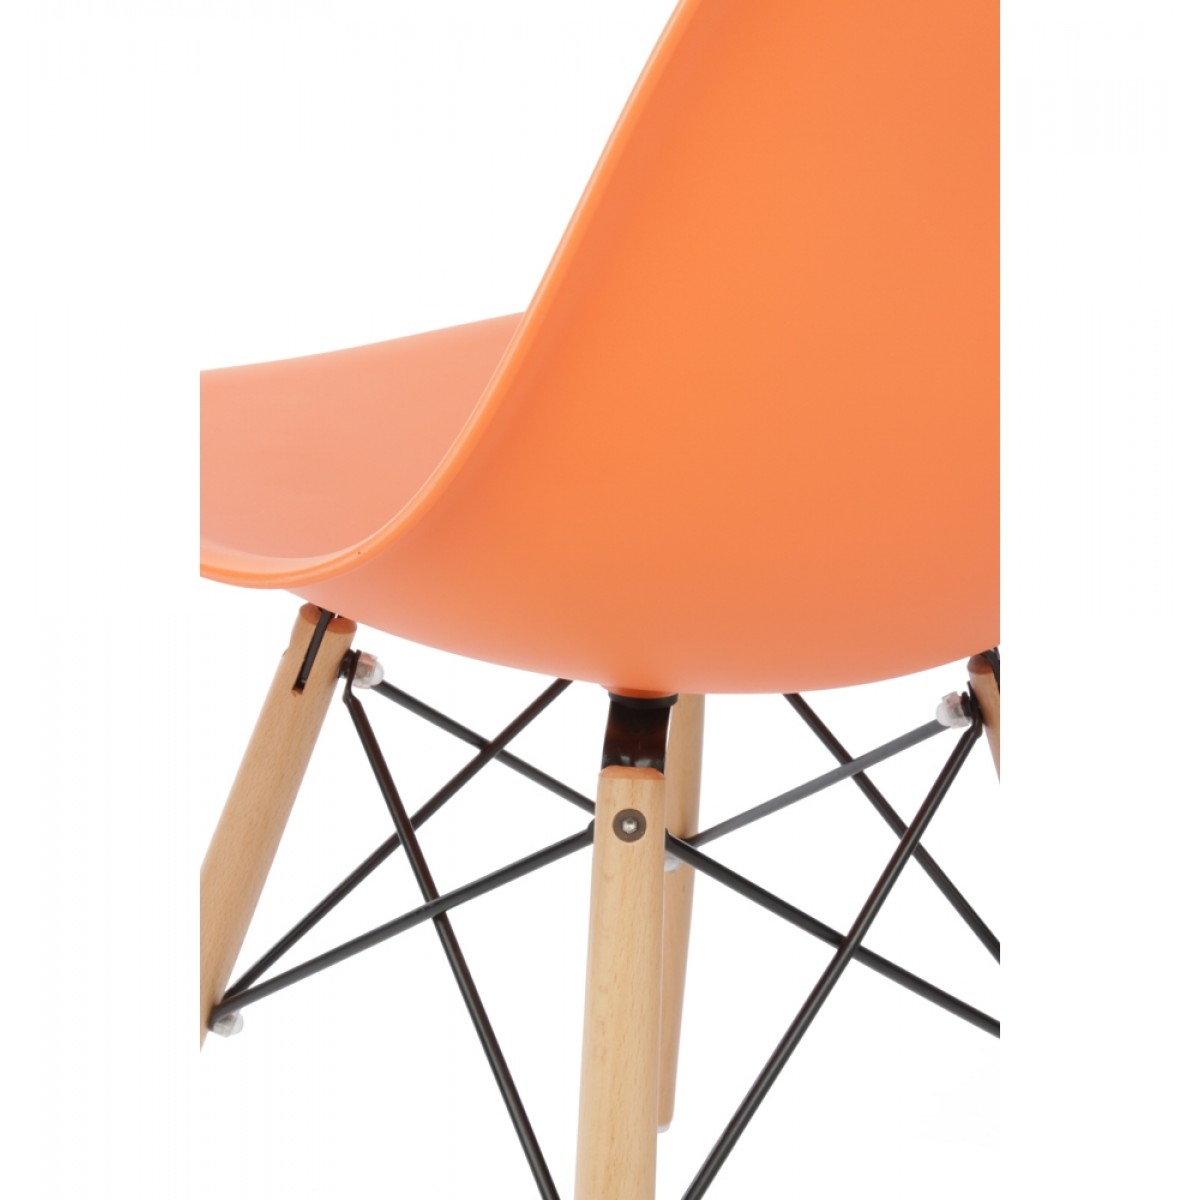 LUXES Plastic Designer Style Dining Chairs Eiffel Retro Lounge Office Chair Orange